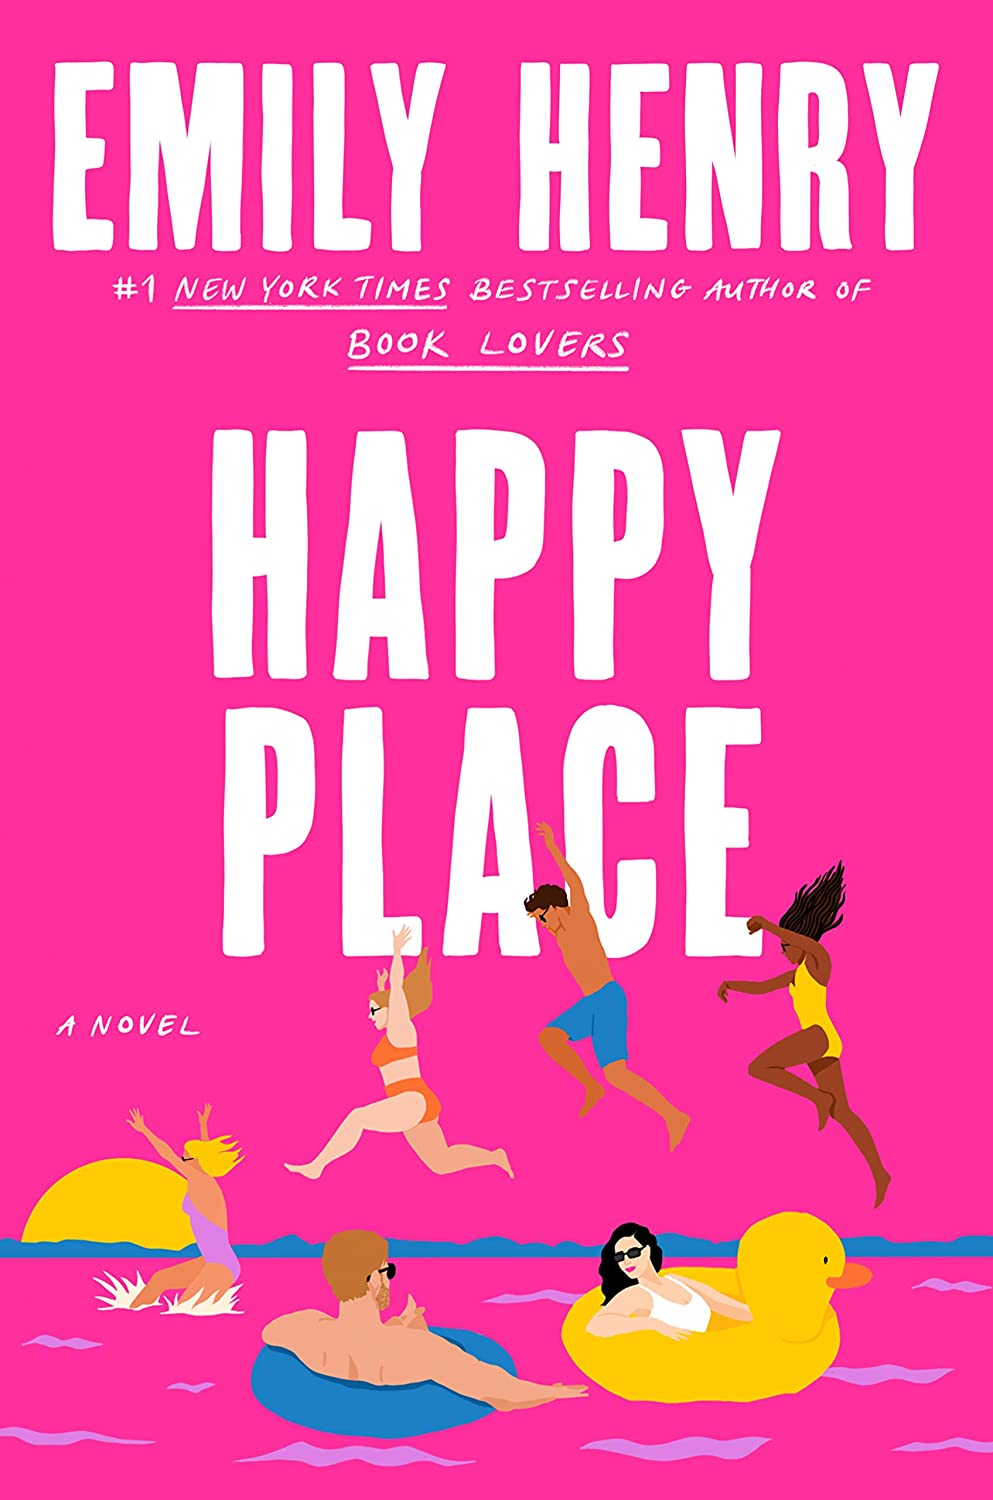 The newest one from my favourite author: Happy Place by Emily Henry #SummerReads #HappyPlace #EmilyHenry